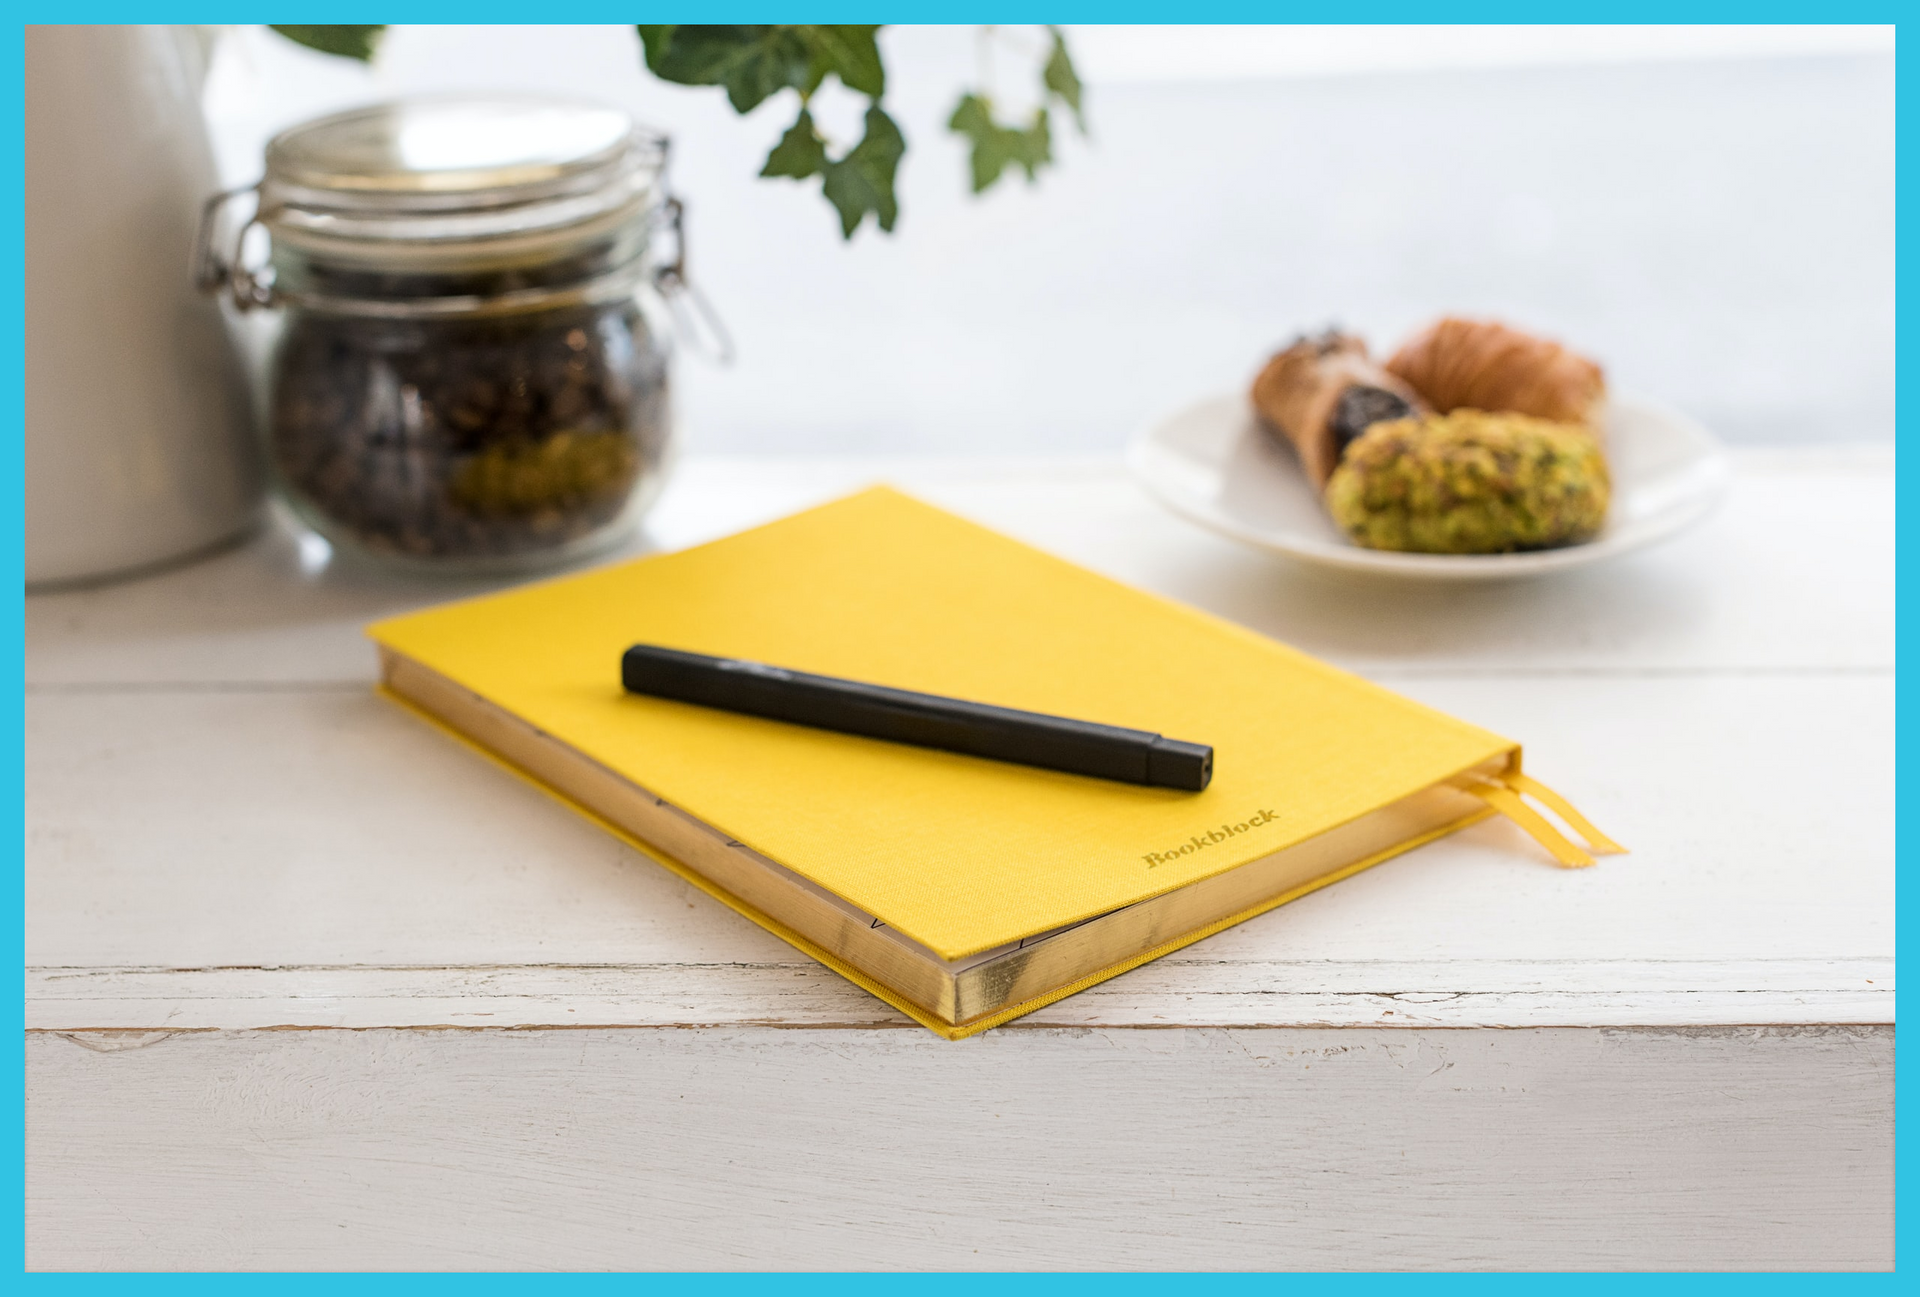 A yellow notebook with a pen and a jar of coffee on a table.